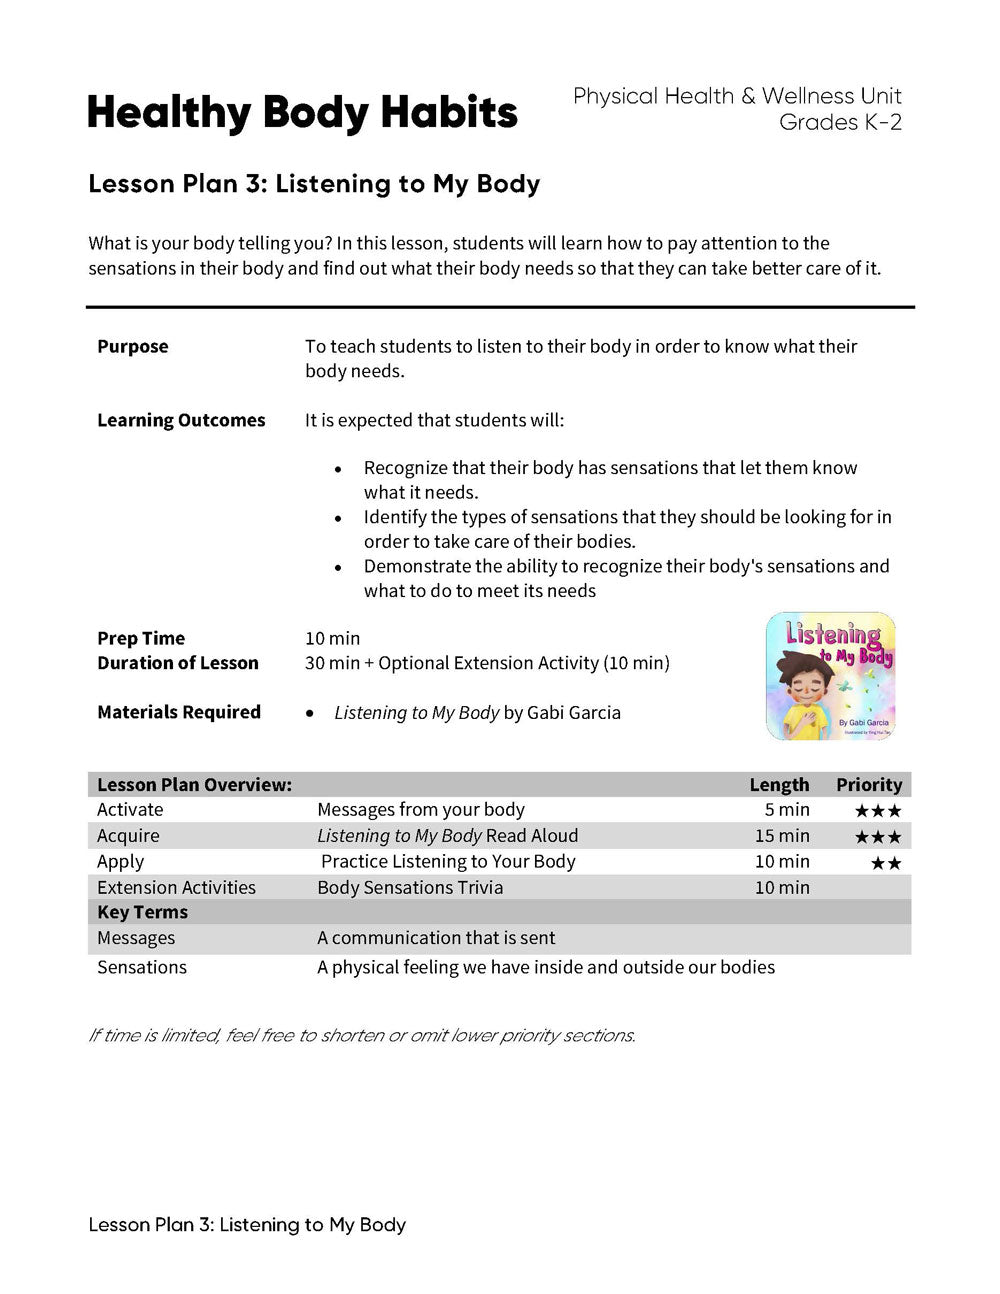 Lesson Plan 3: Listening to My Body